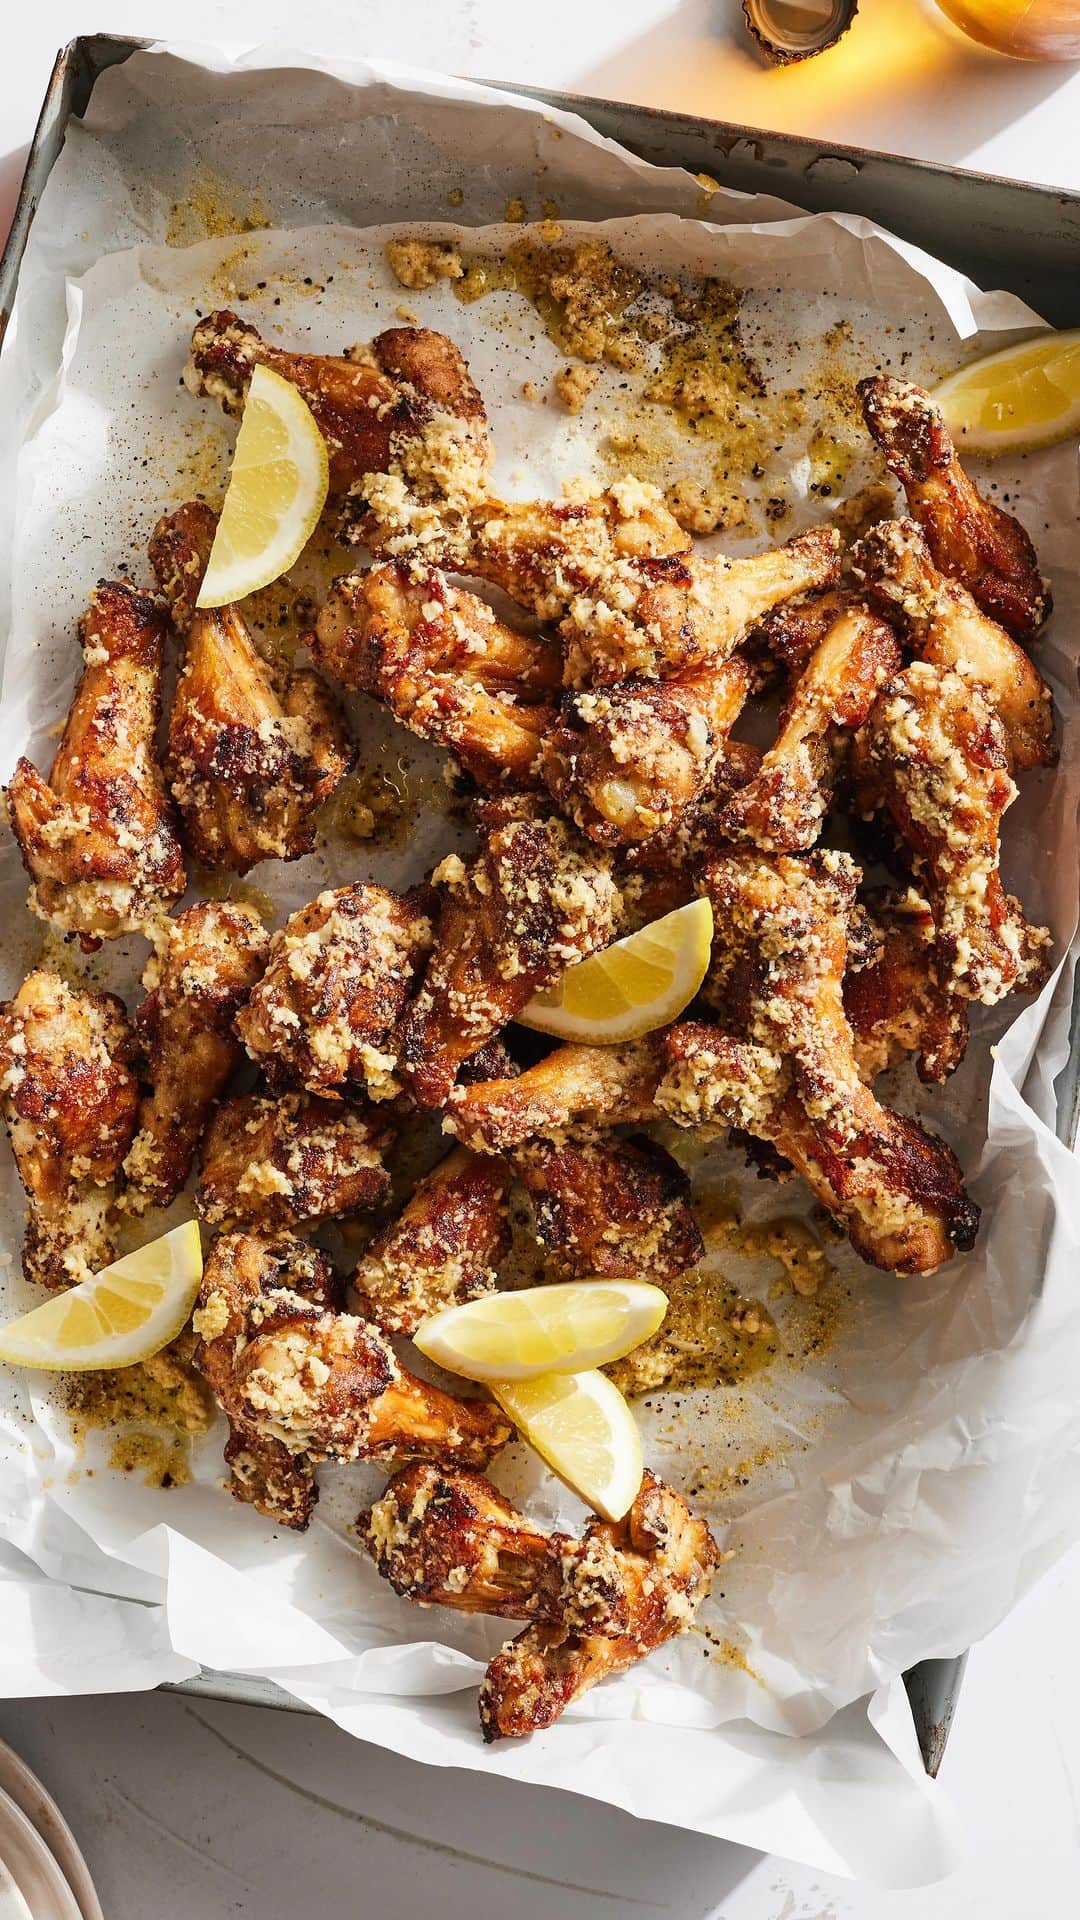 Gaby Dalkinのインスタグラム：「LEMON PEPPER PARM WINGS (they’re superior to Buffalo wings just saying) need to be on your next game day menu! Recipe is linked in my bio 🍋 https://whatsgabycooking.com/lemon-pepper-parmesan-wings/」